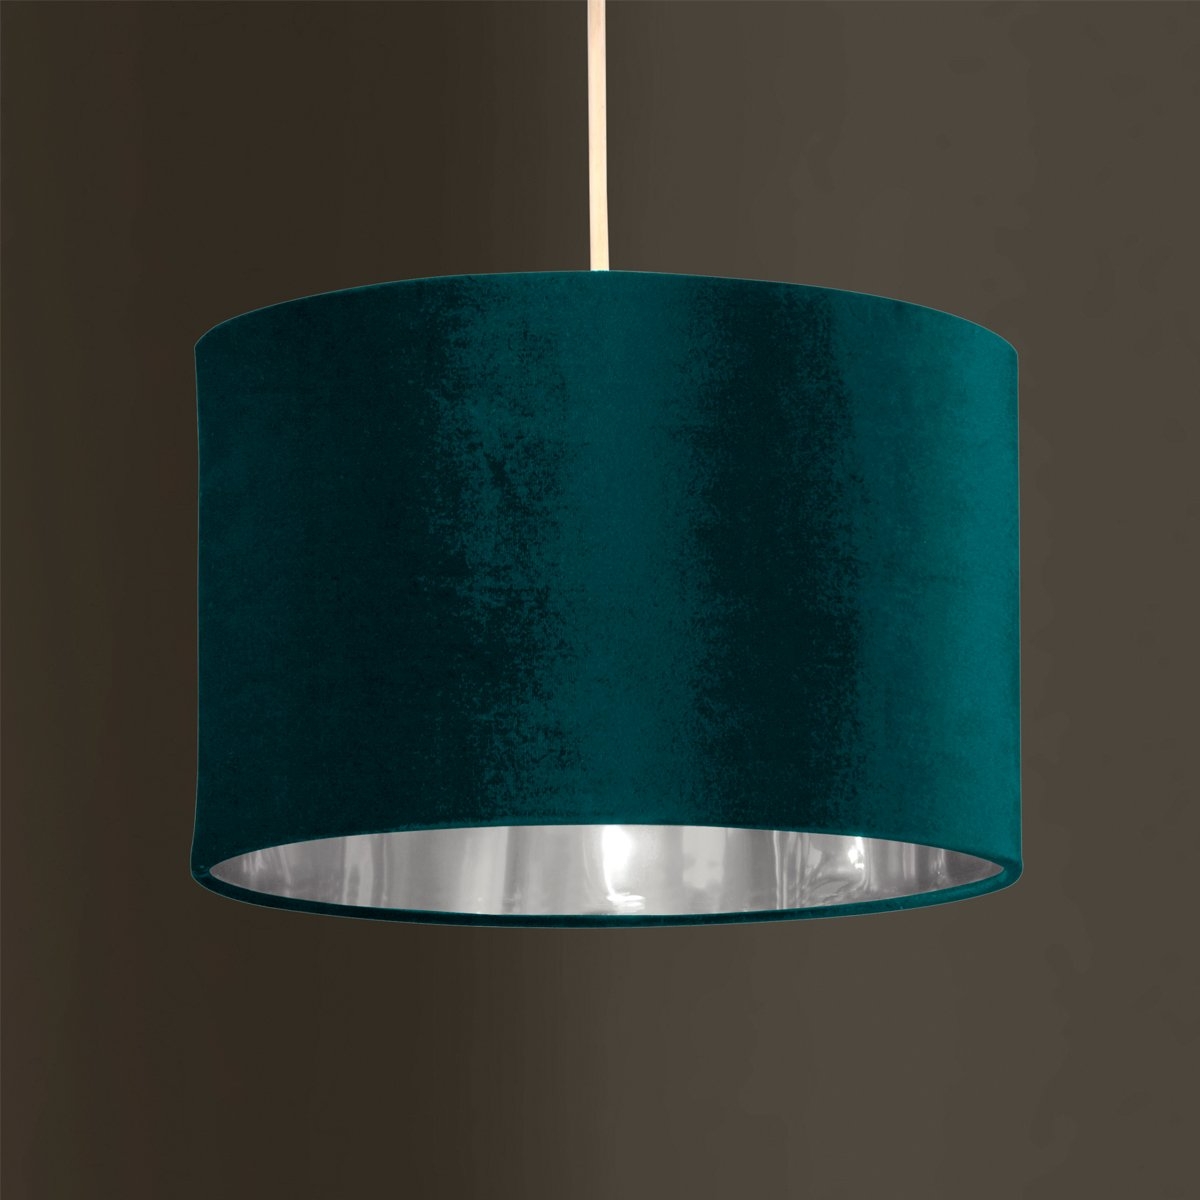 Luxury Pendant Shades – Choice Of Velvet Or Cotton Teal Velvet & Silver – By CGC Interiors